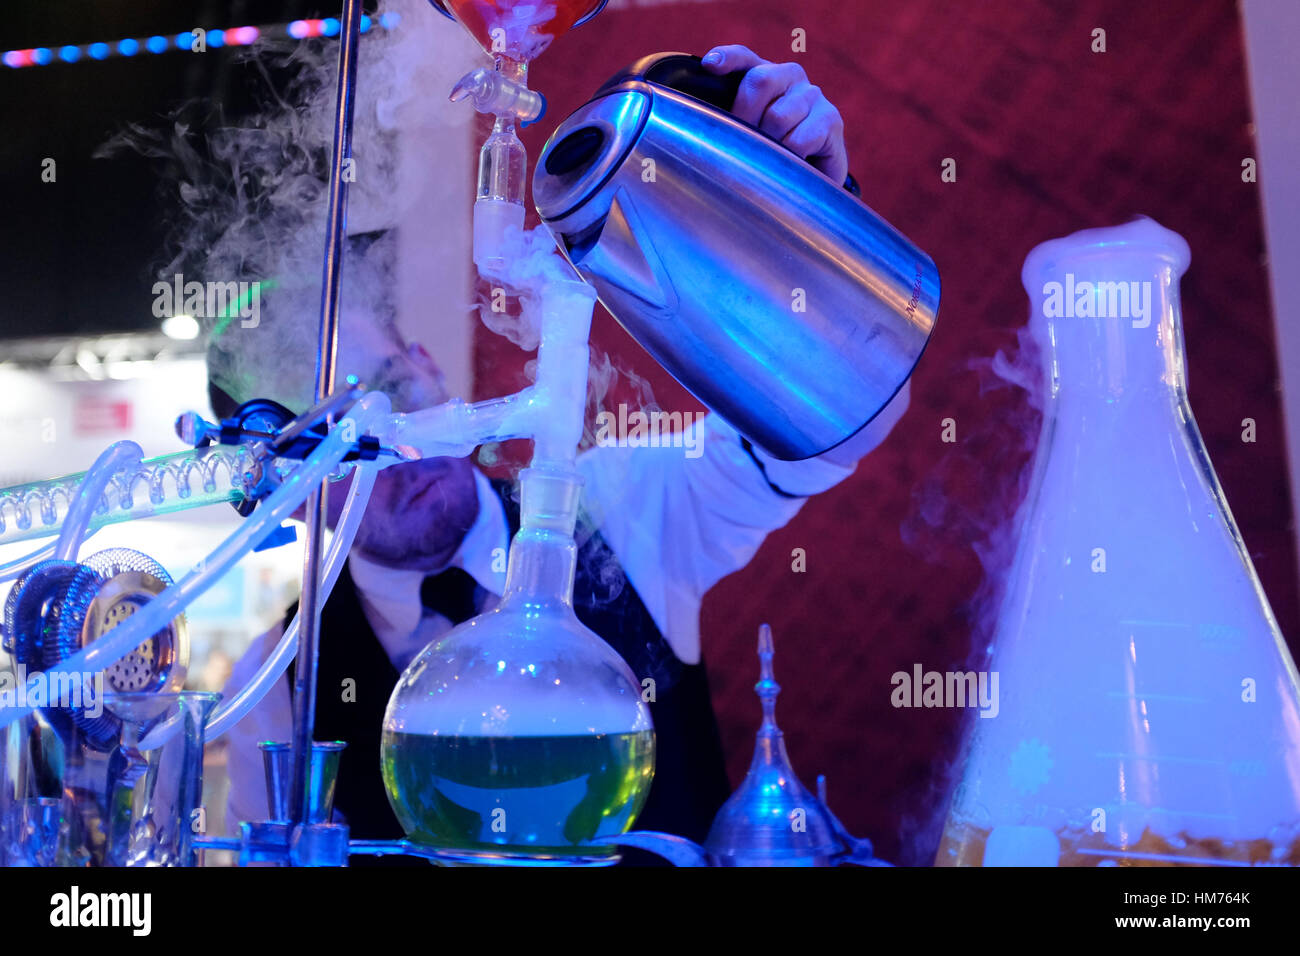 A barman preparing a molecular alcoholic cocktail using the equipment and techniques of molecular gastronomy in a bar in the city of Tel Aviv in Israel.  Known as molecular mixology, the method takes scientific principles and tools and applies them to the construction of alcoholic beverages. These cocktails often require their creator to freeze, gel or flambé ingredients. Stock Photo